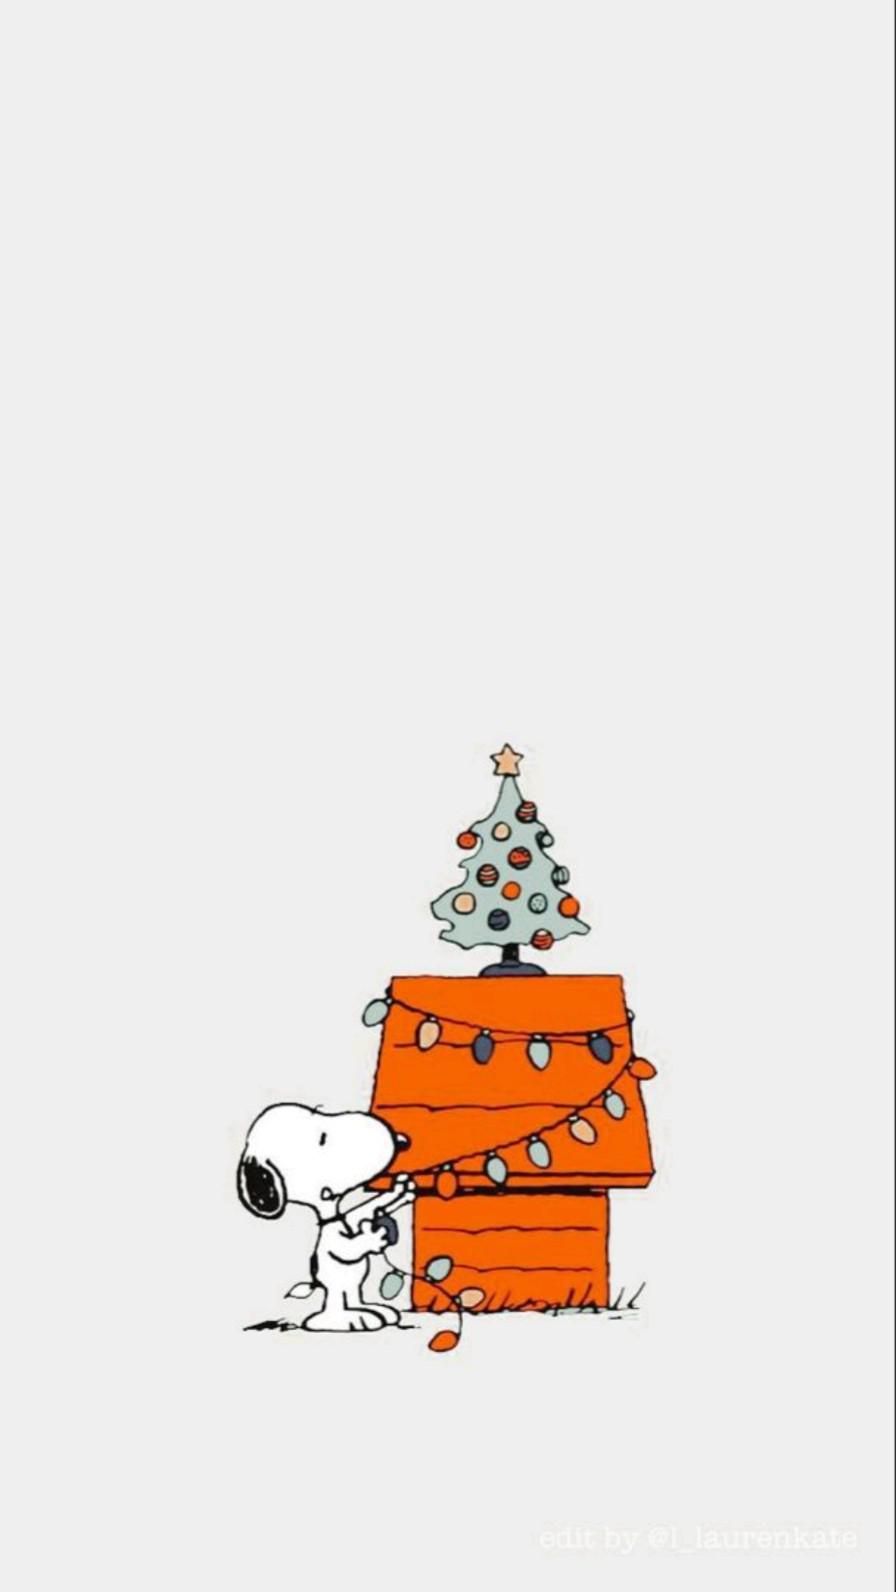 200+] Snoopy Backgrounds | Wallpapers.com